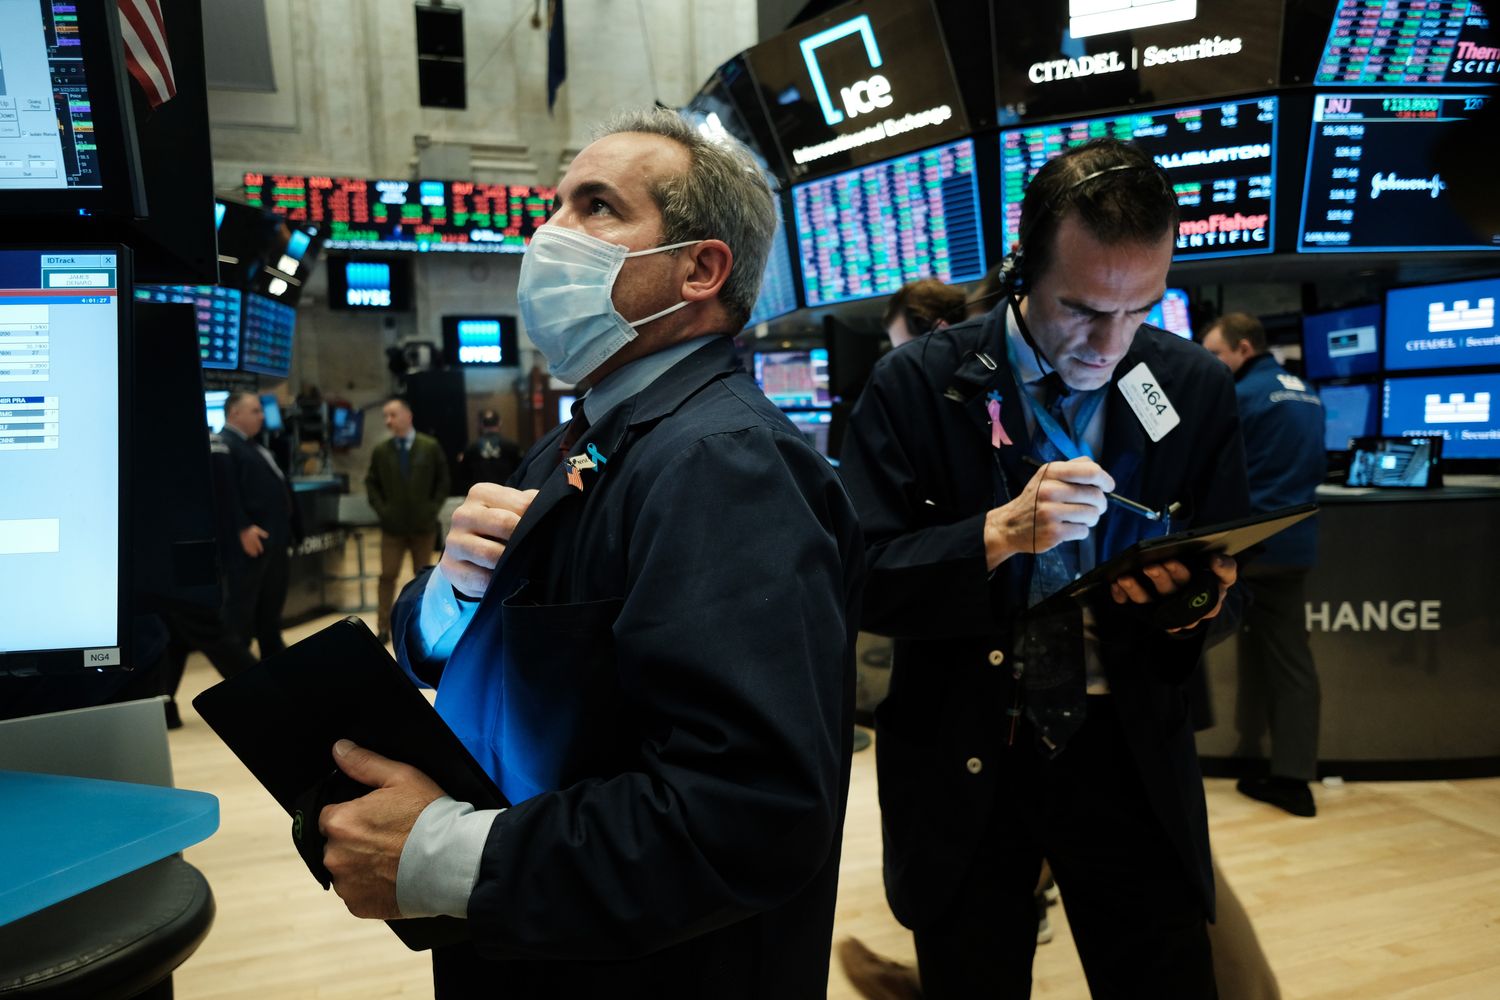 Shares tumble as traders flip jittery